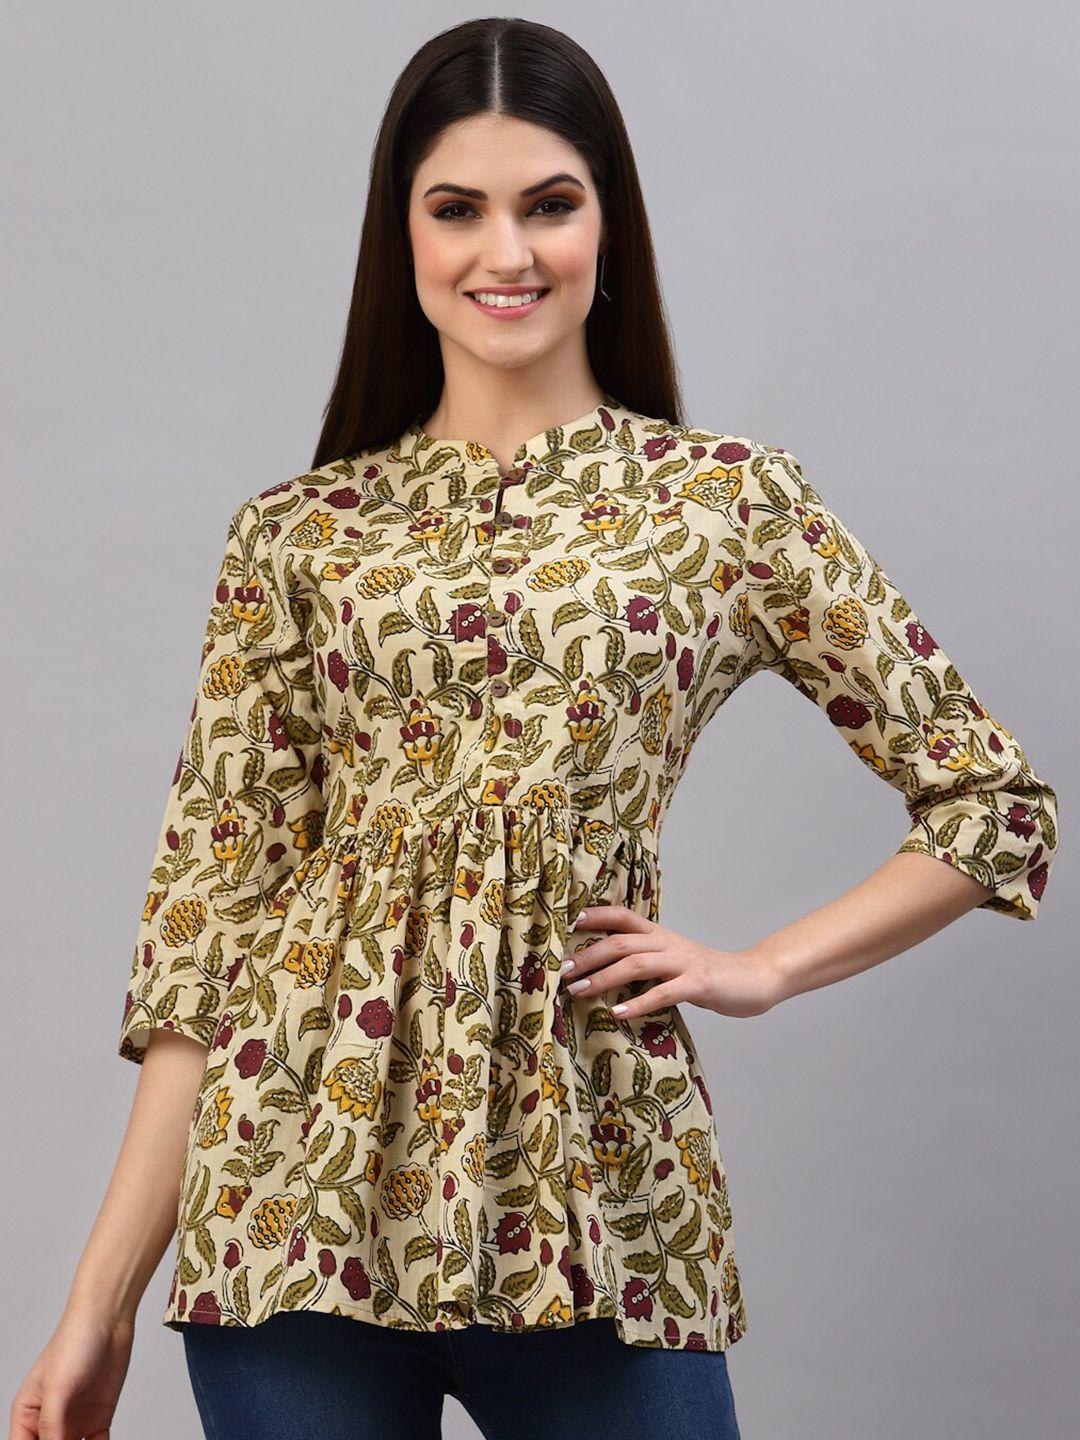 stylum beige and maroon floral printed cotton peplum top